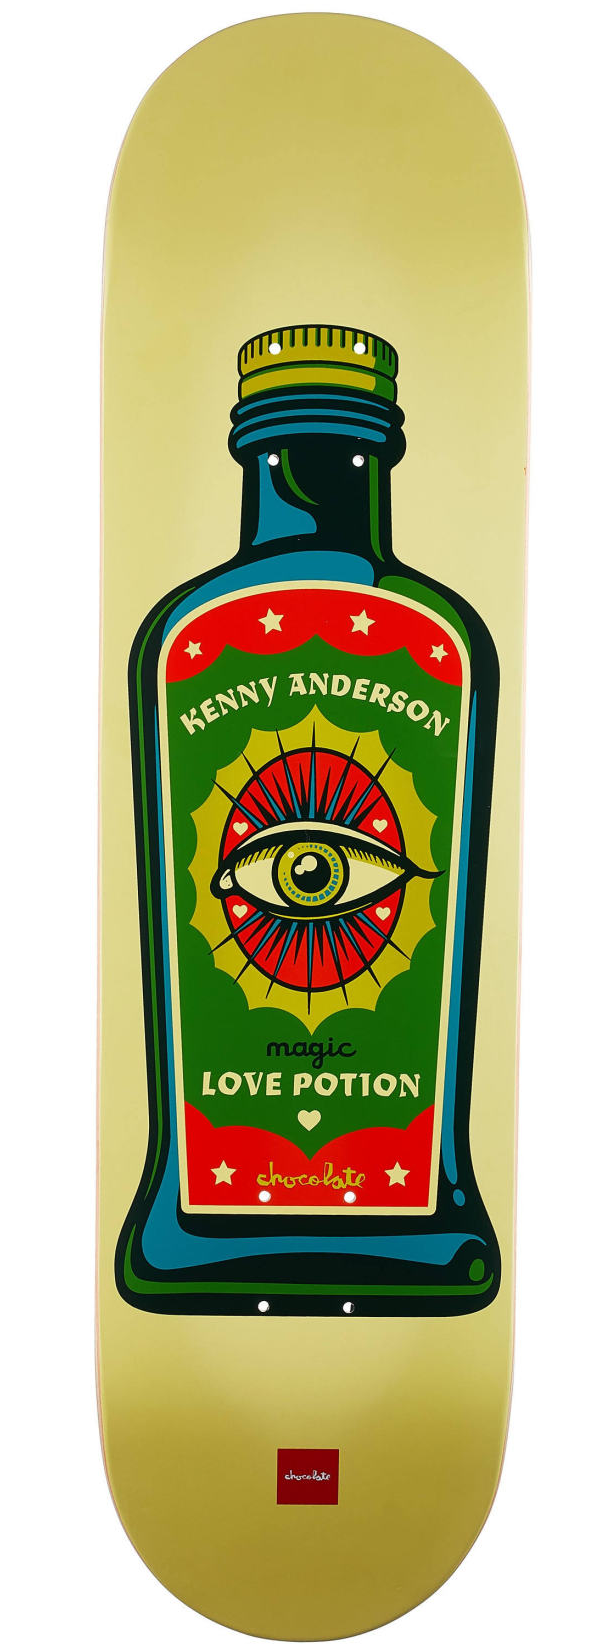 Chocolate Skateboard Company Anderson Hecox Essentials Series Magic Love Potion Deck 8.25 in